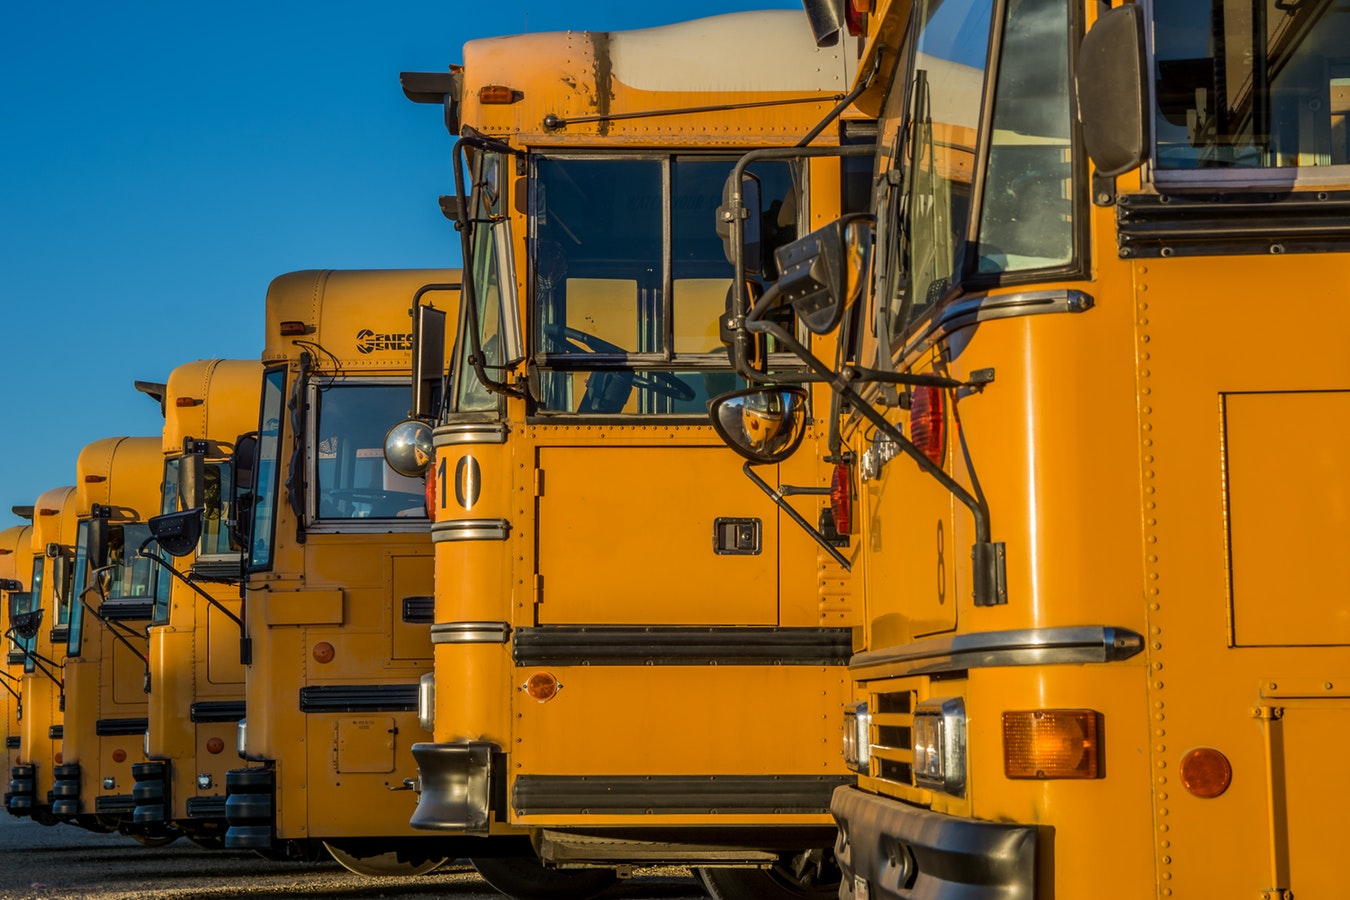 School buses lined up